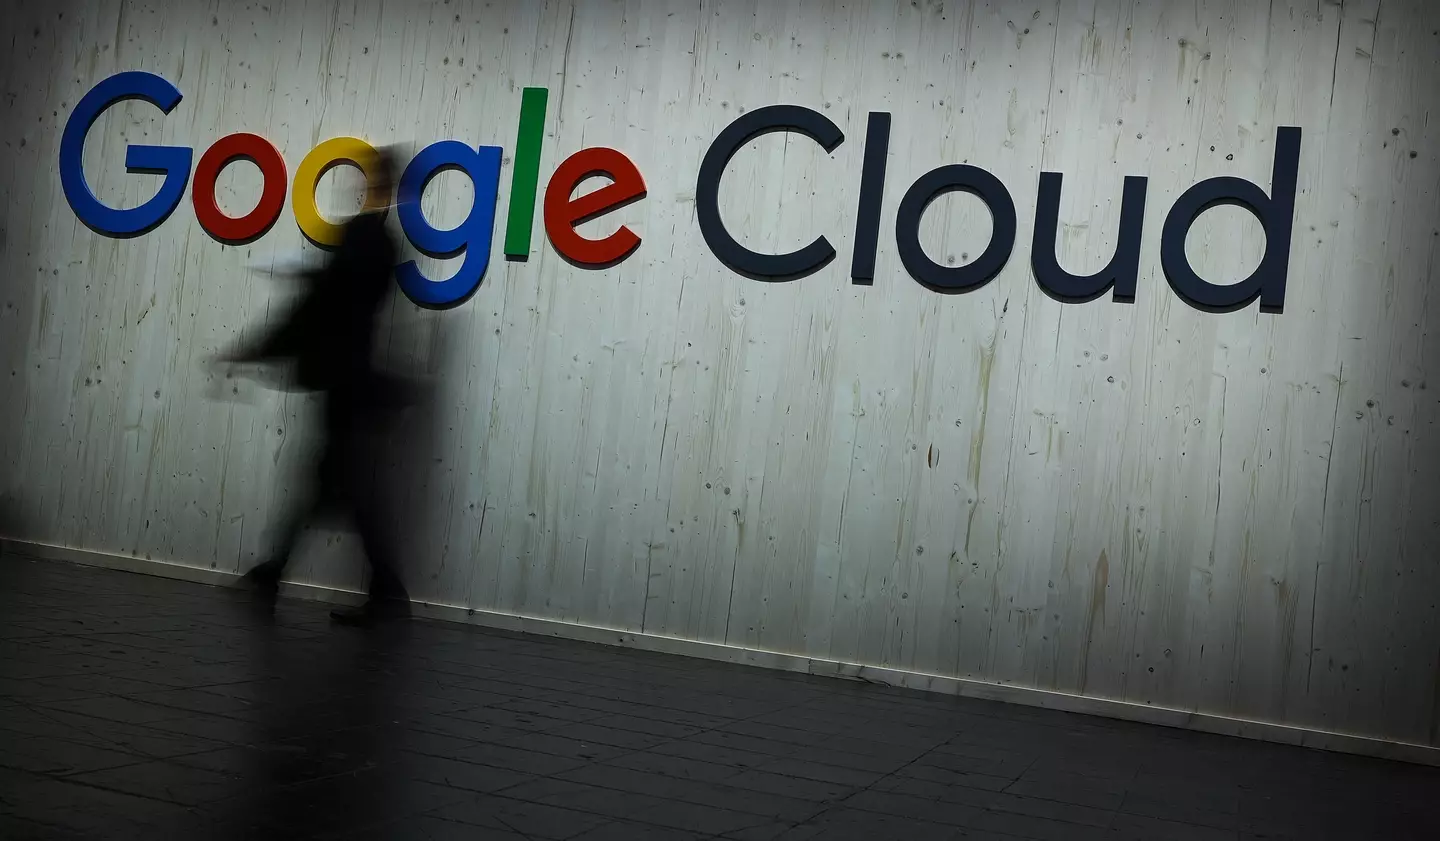 Google Cloud caused the disruption. (RONNY HARTMANN/AFP via Getty Images)